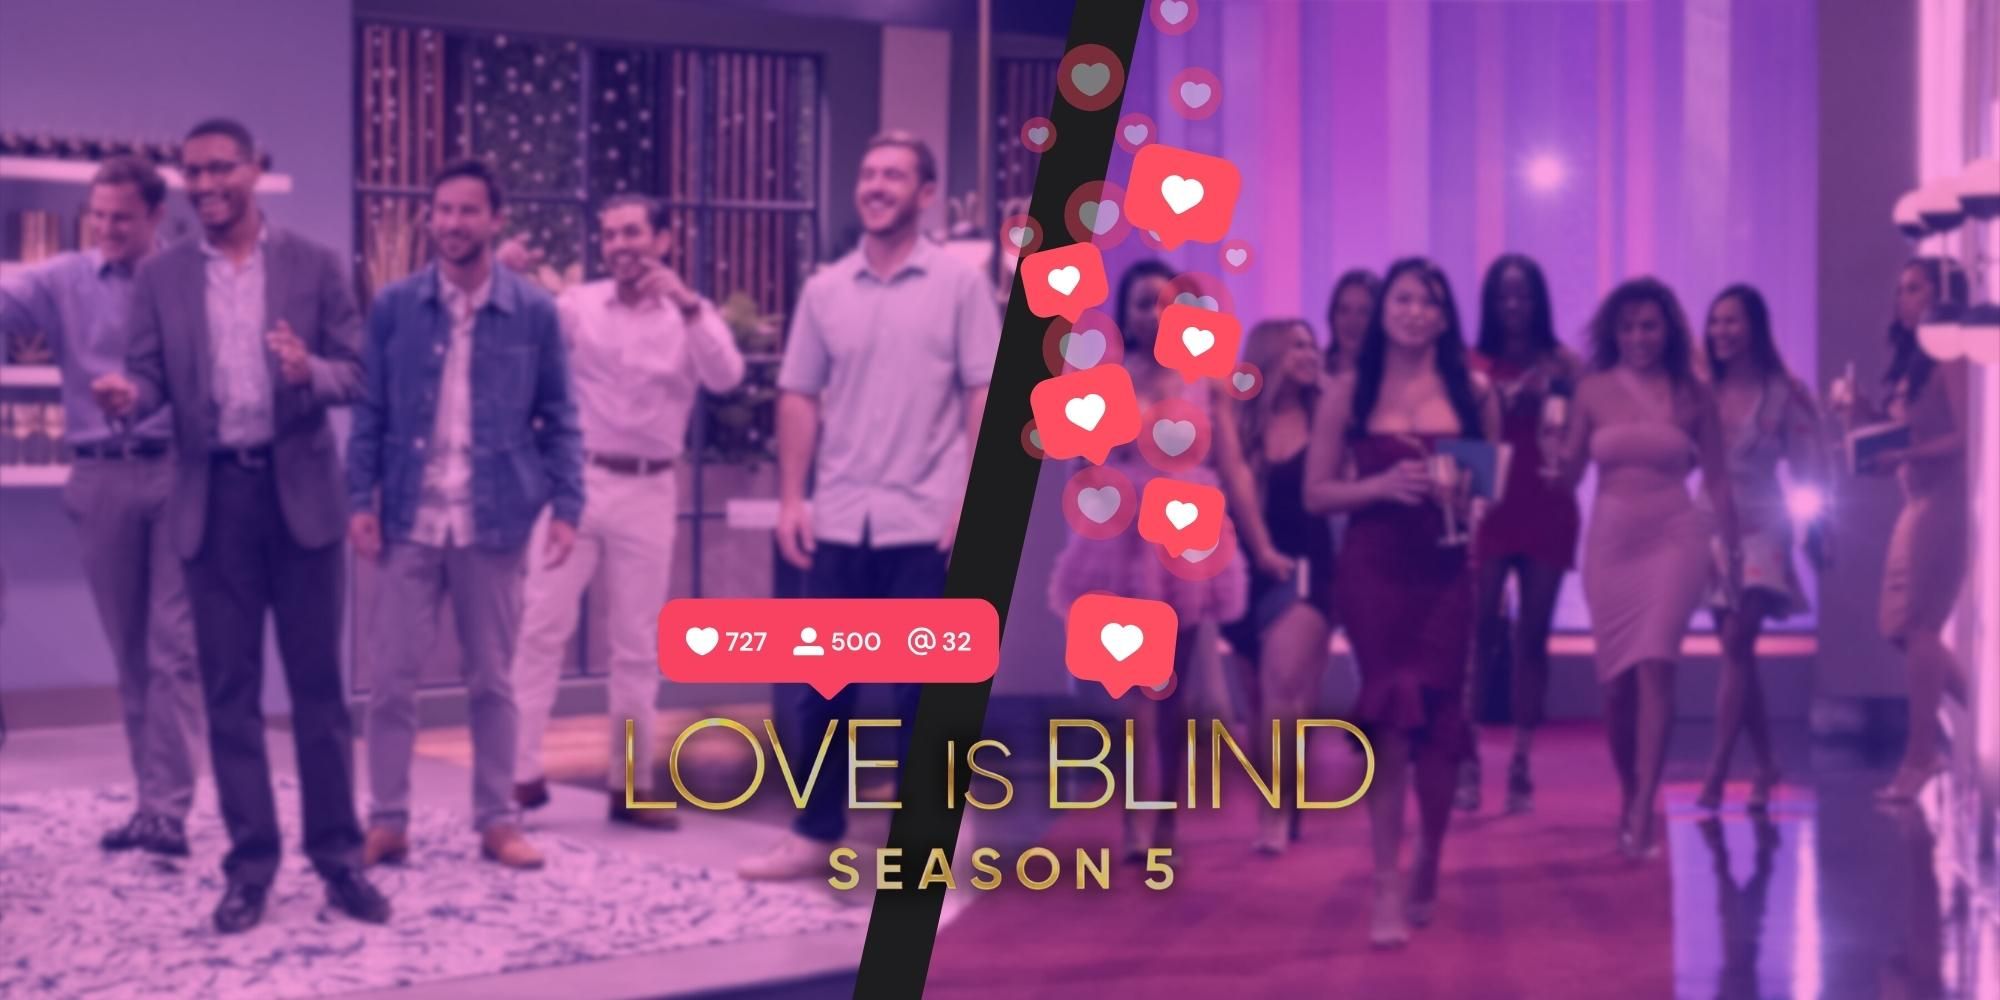 Where To Follow The Love Is Blind Season 5 Cast On Instagram